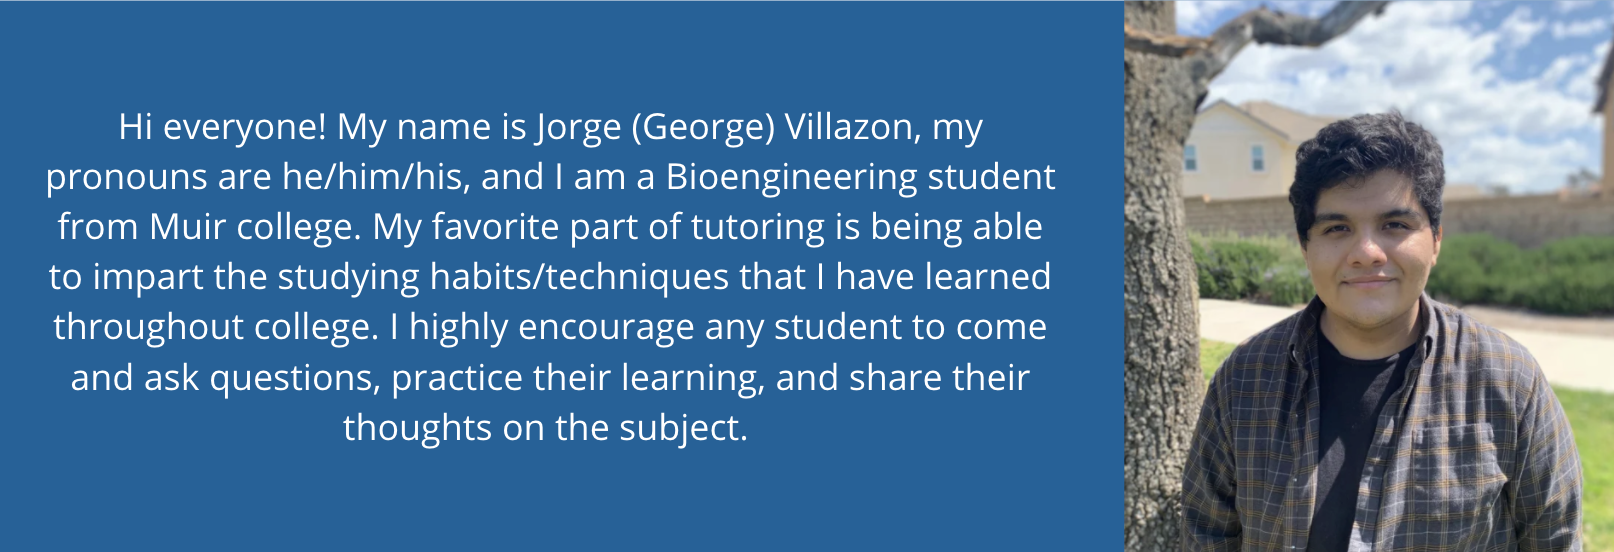 3 of 4, Hi everyone! My name is Jorge (George) Villazon, my pronouns are he/him/his, and I am a Bioengineering student from Muir college. My favorite part of tutoring is being able to impart the studying habits/techniques that I have learned throughout college. I highly encourage any student to come and ask questions, practice their learning, and share their thoughts on the subject. 